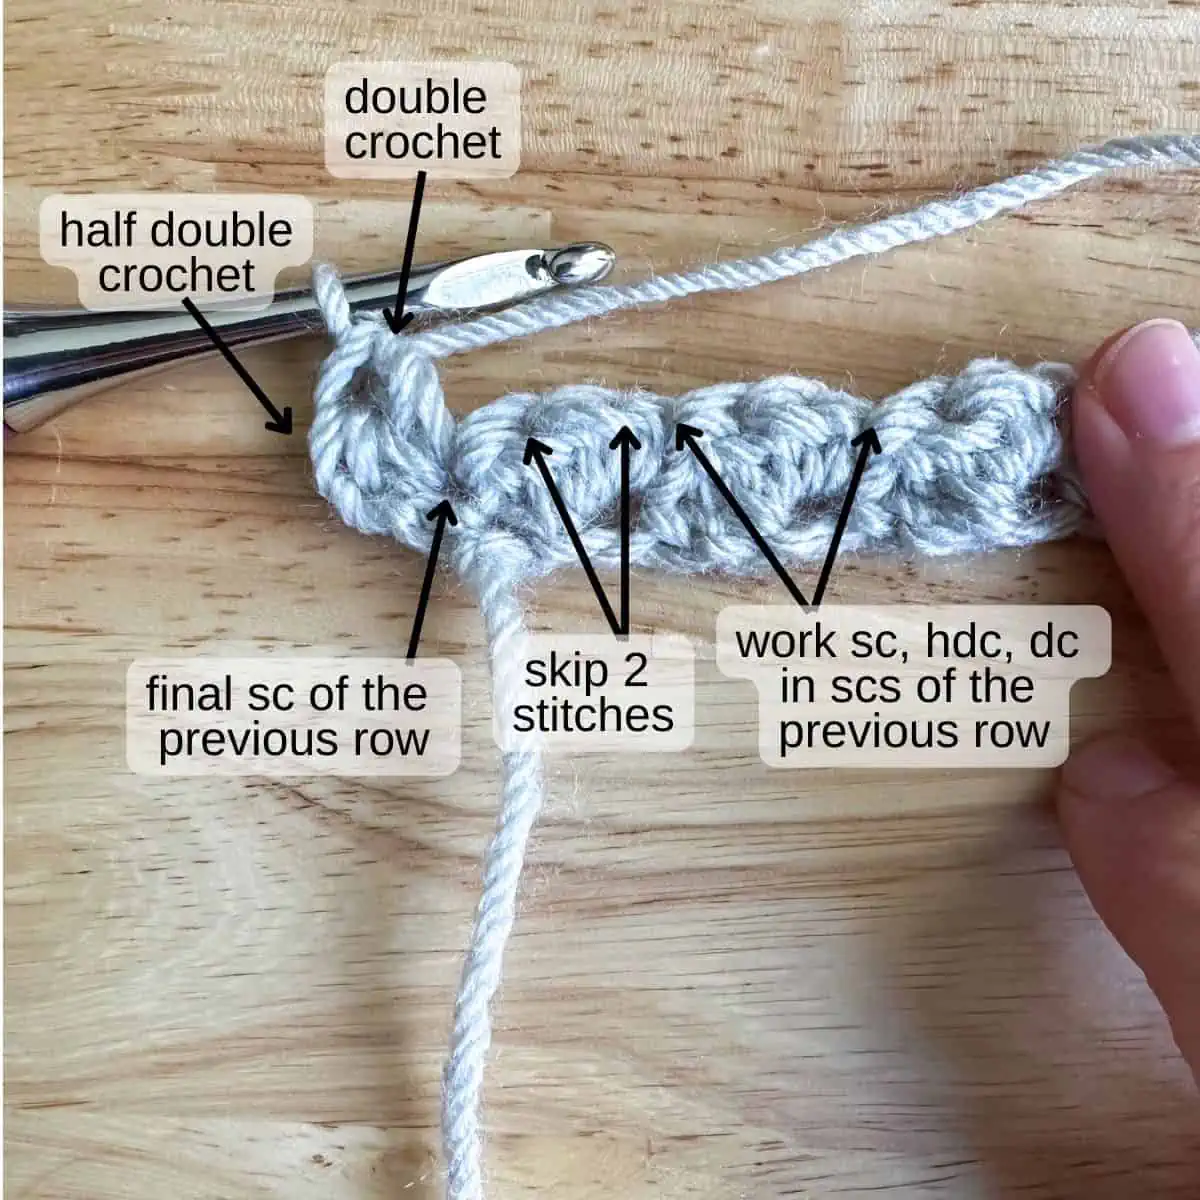 starting row 2 with arrows and stitch labels for left handed crocheters